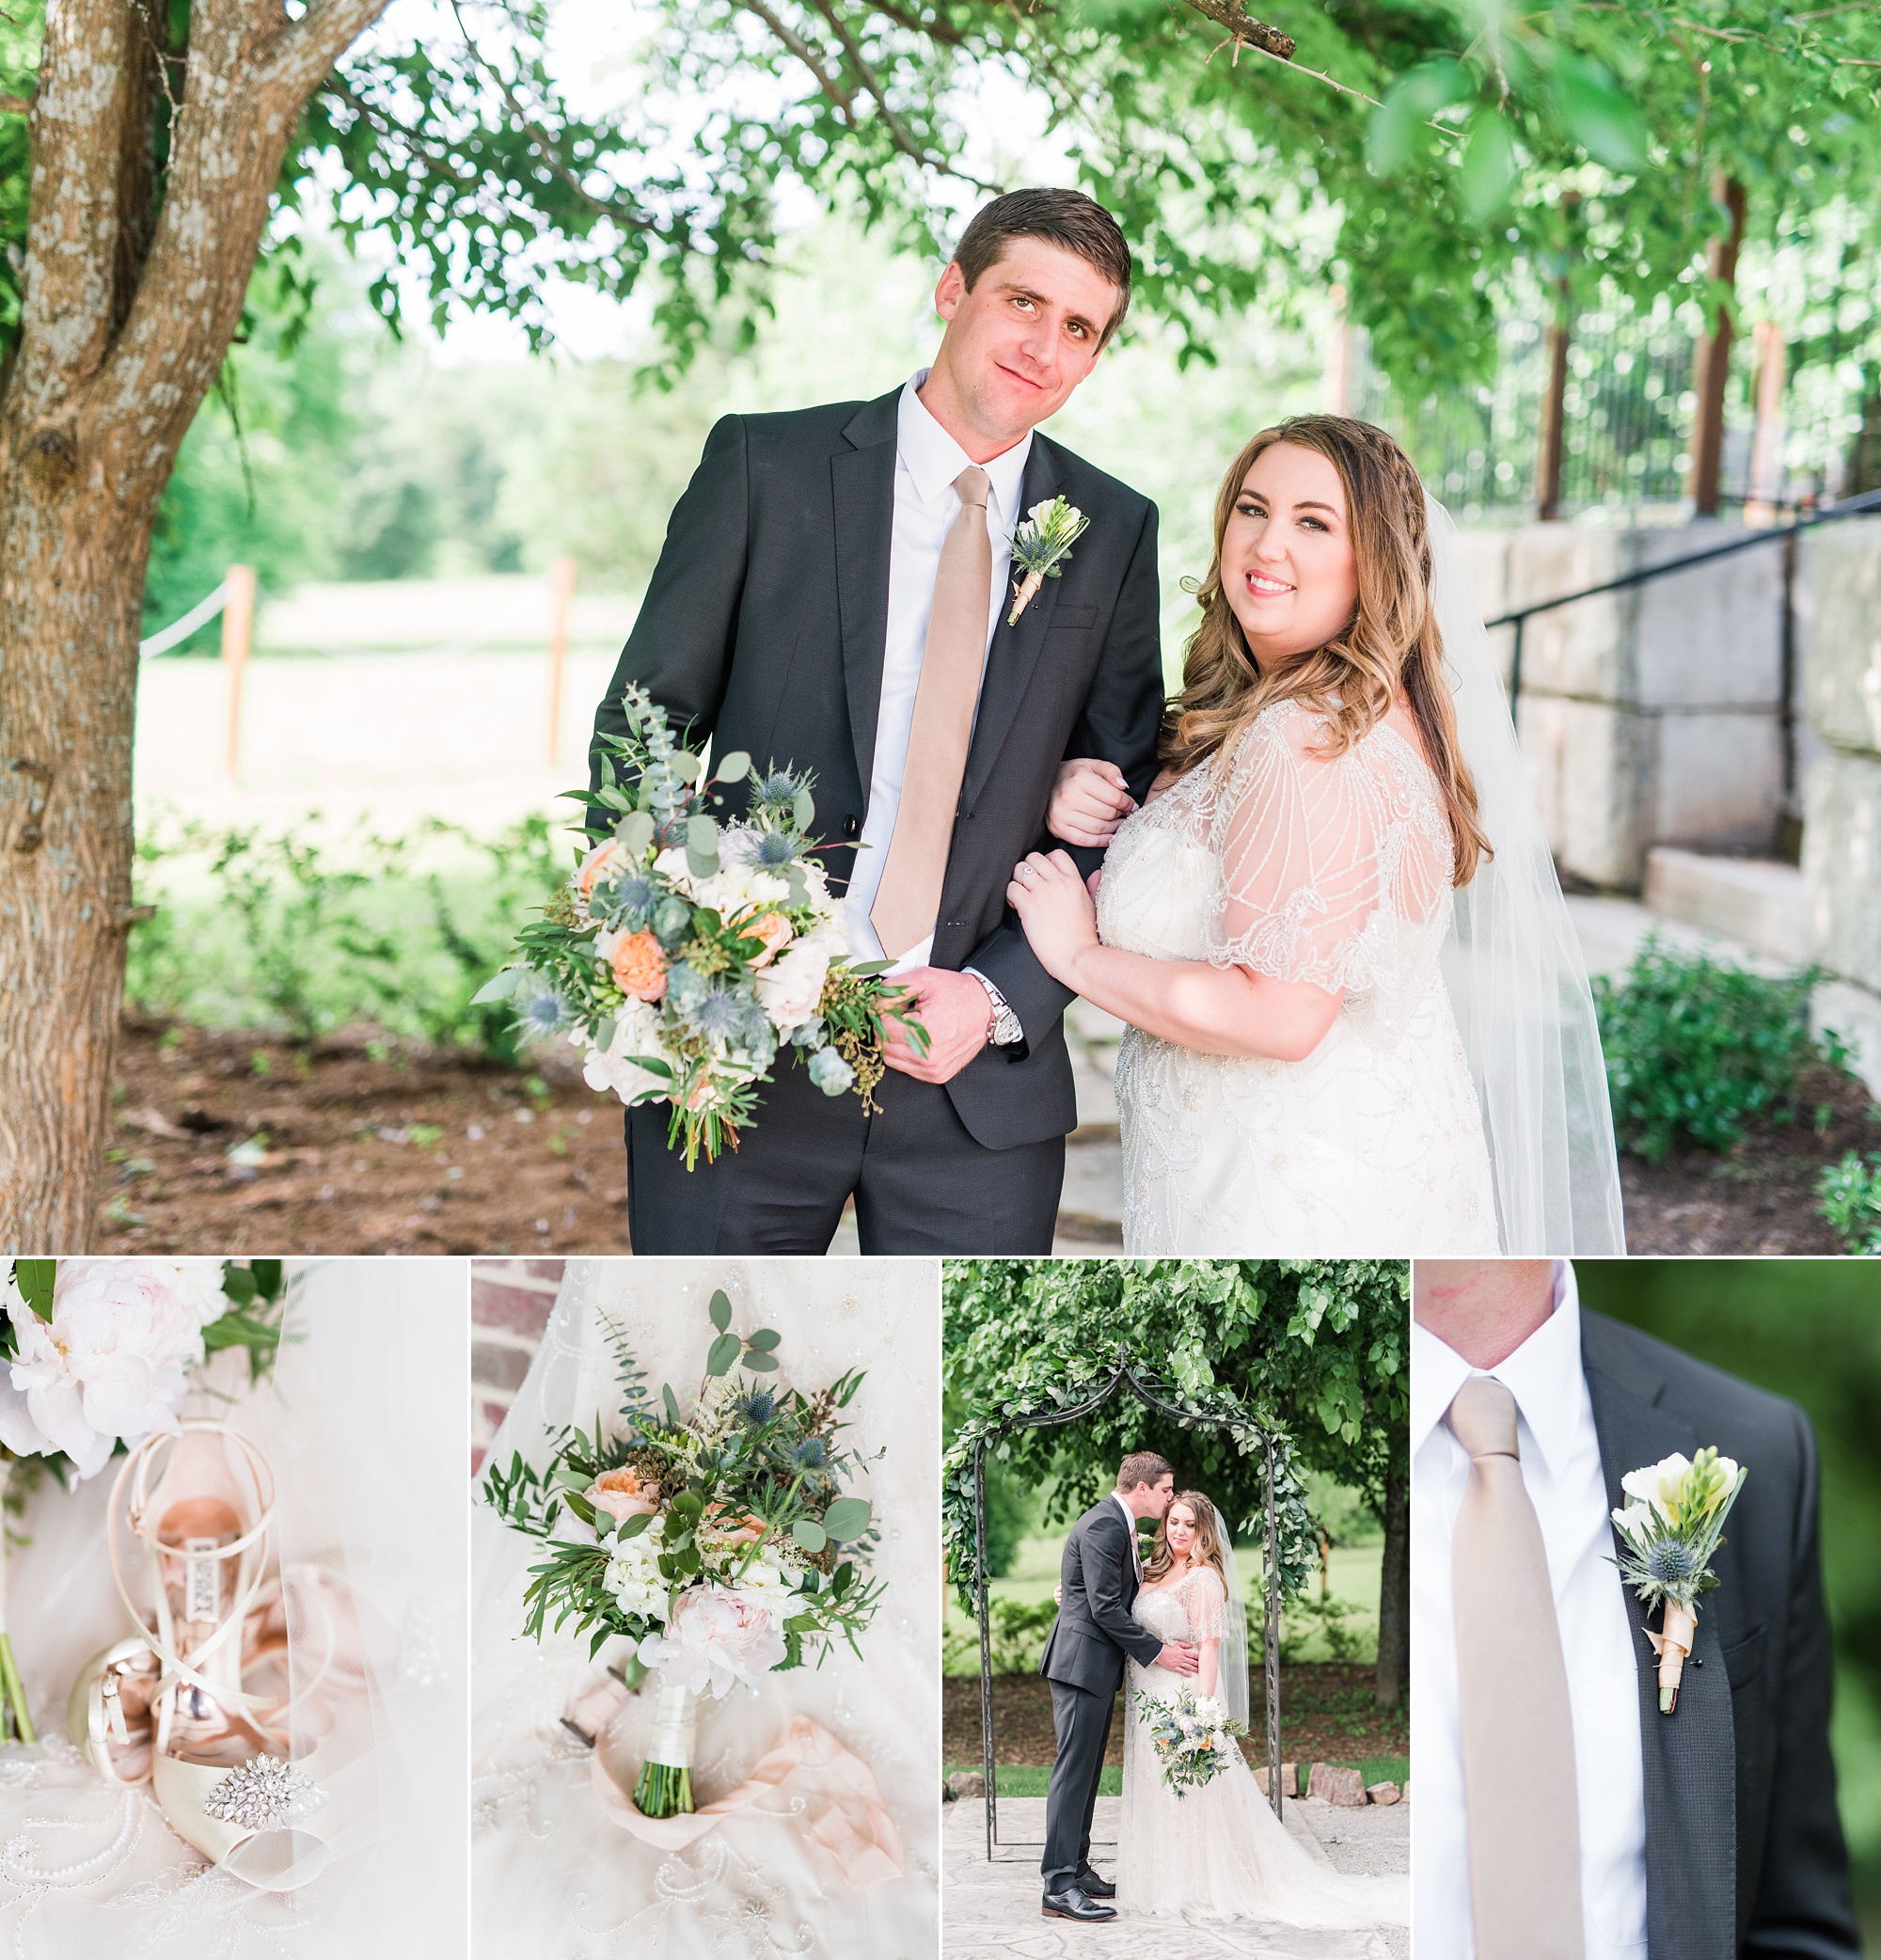 Bohemian Inspired Wedding at La Cour Venue in McKinney